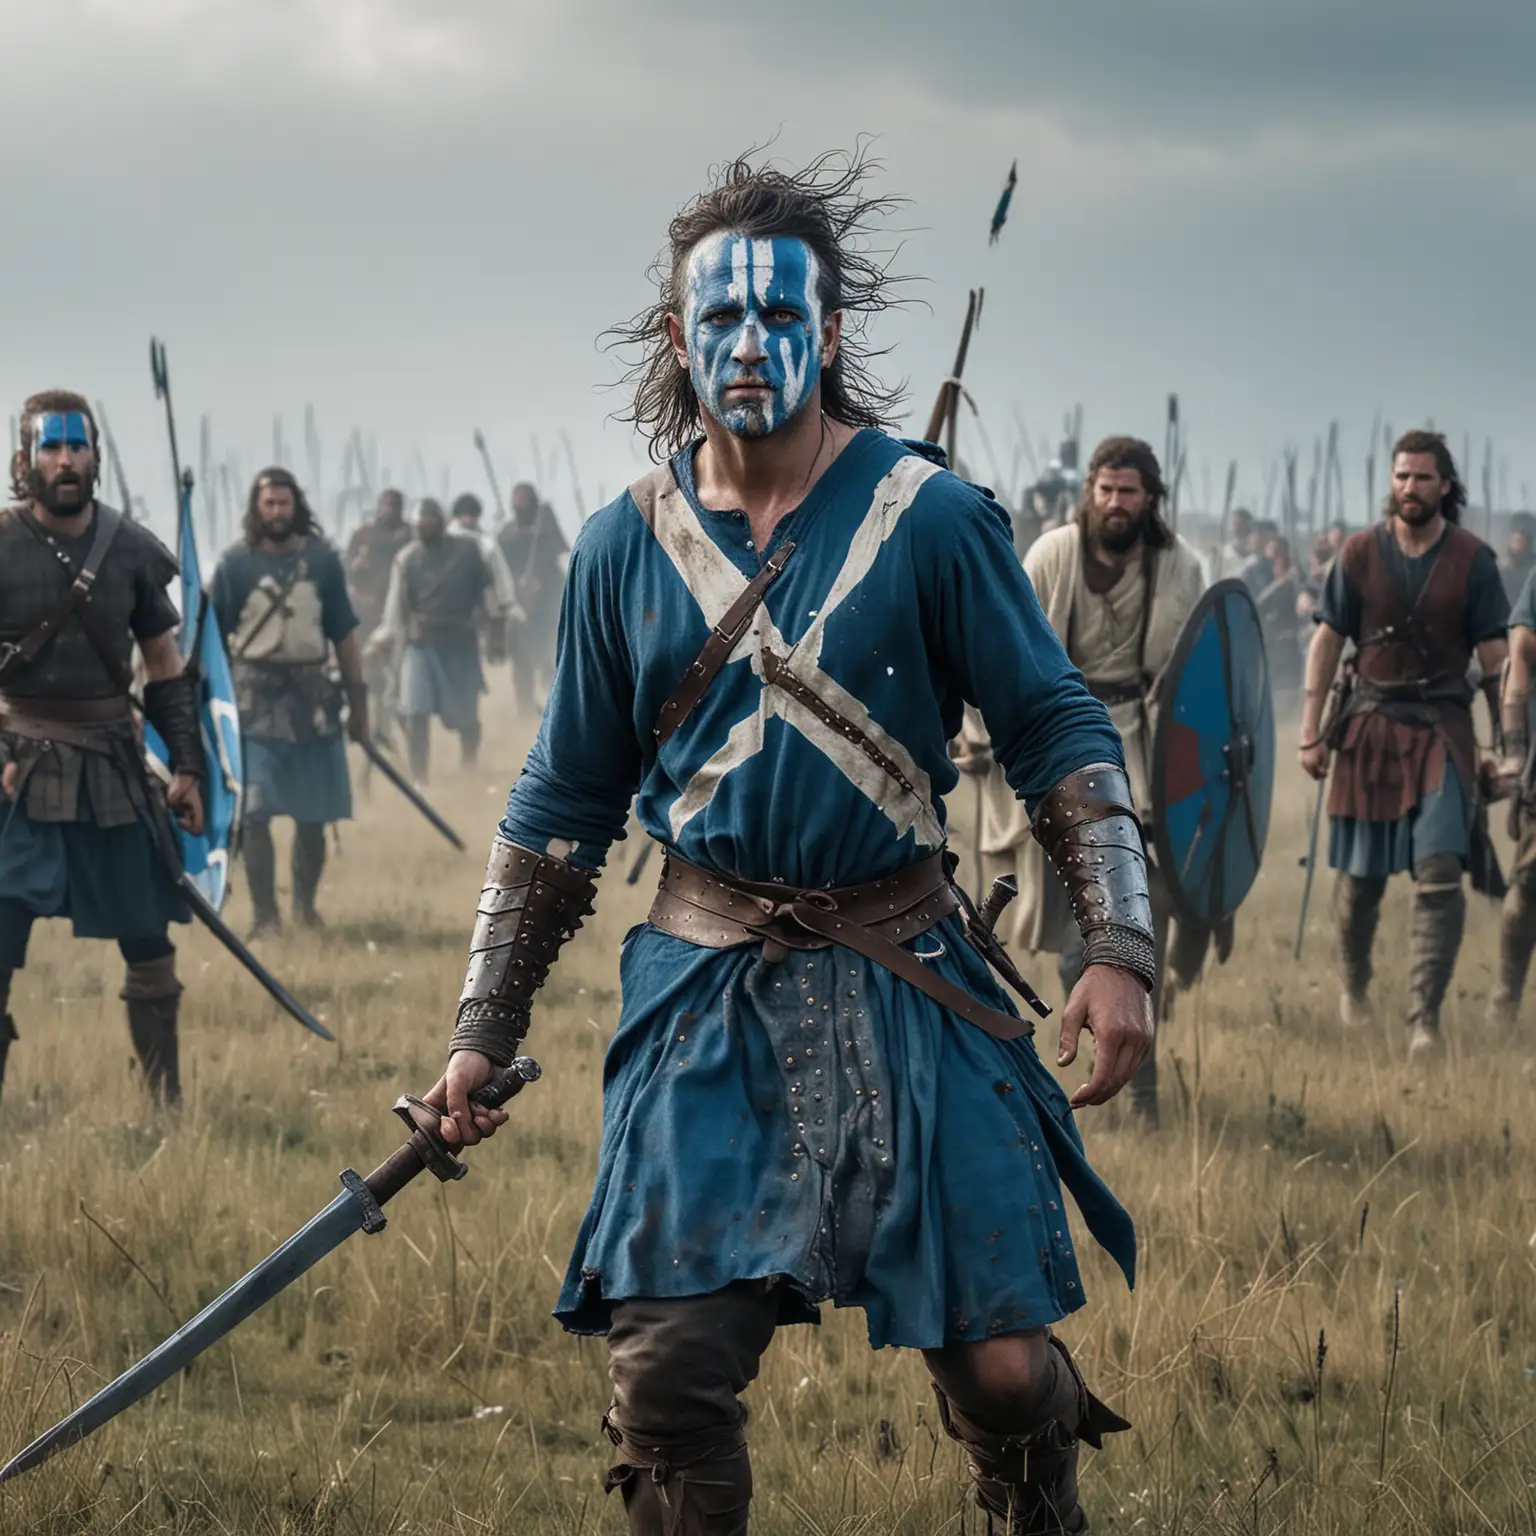 Medieval Battle Braveheart Warriors Clash with Blue and White Warpaint